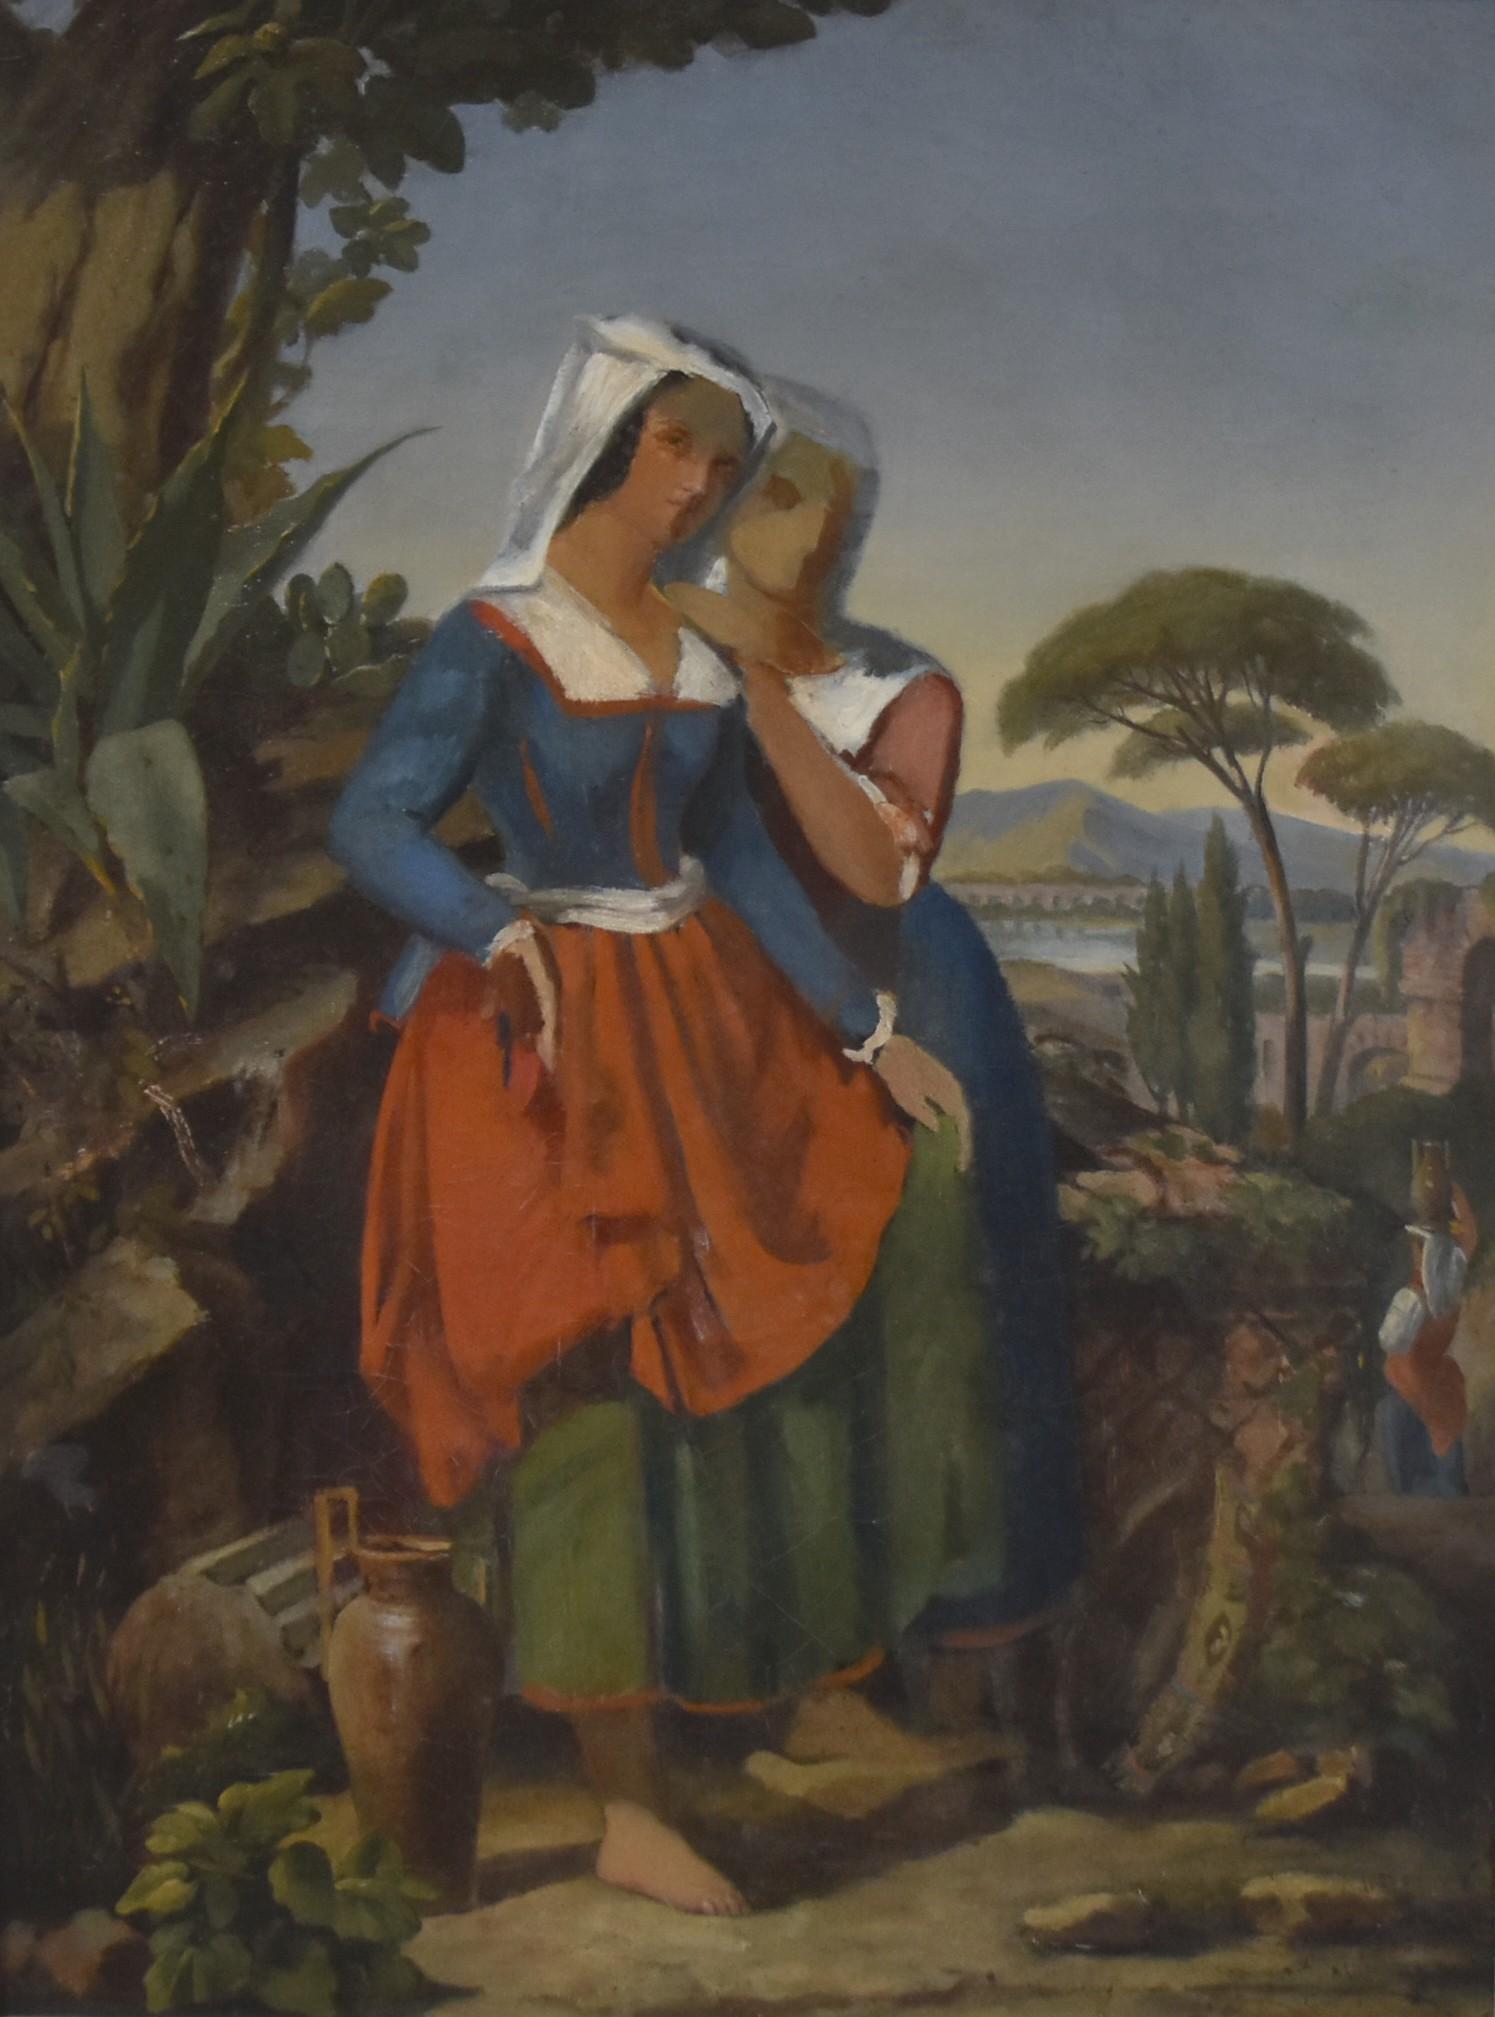 Unknown Figurative Painting - 19th Century French school, Two italian women in a landscape, an oil sketch